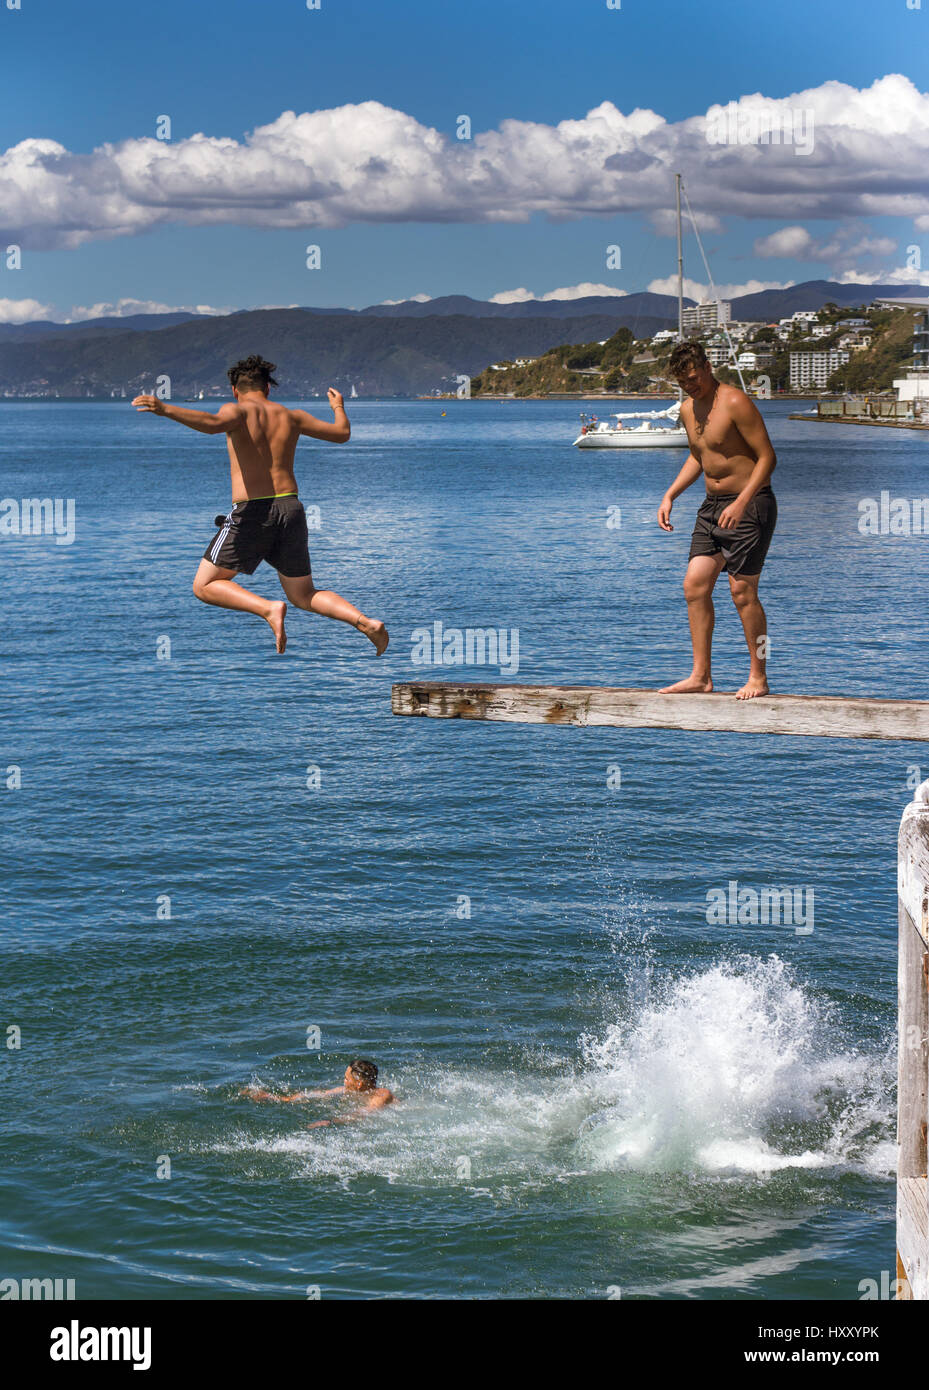 Wellington, New Zealand - February 11, 2017: Wellington waterfront with teenagers jumping off a diving board near Frank Kitts Park and lagoon bridge. Stock Photo